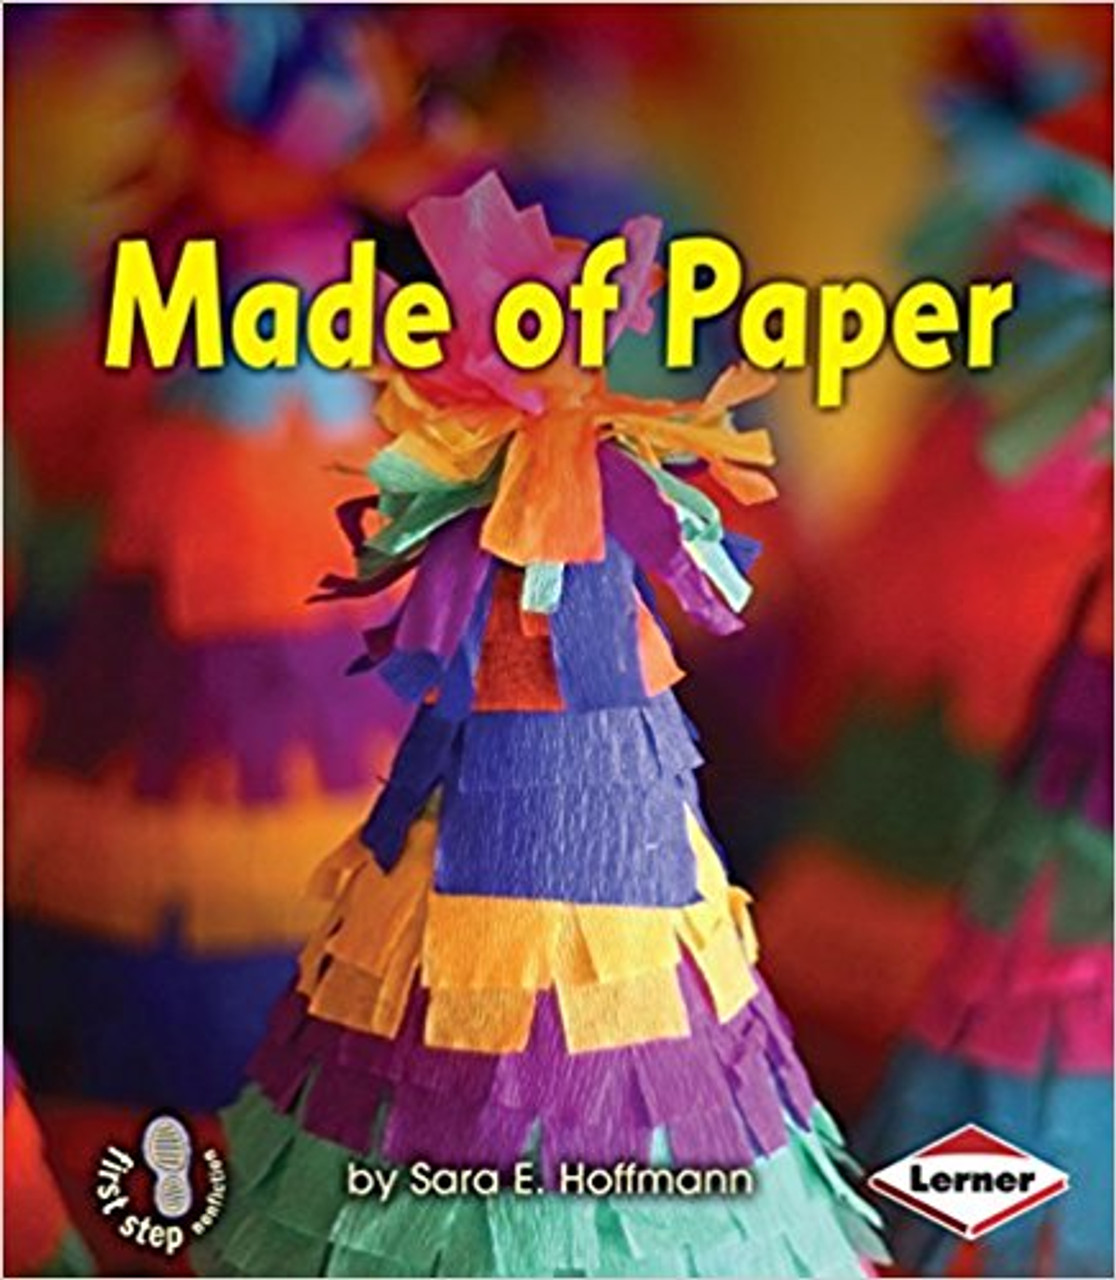 Made of Paper by Sara E Hoffman